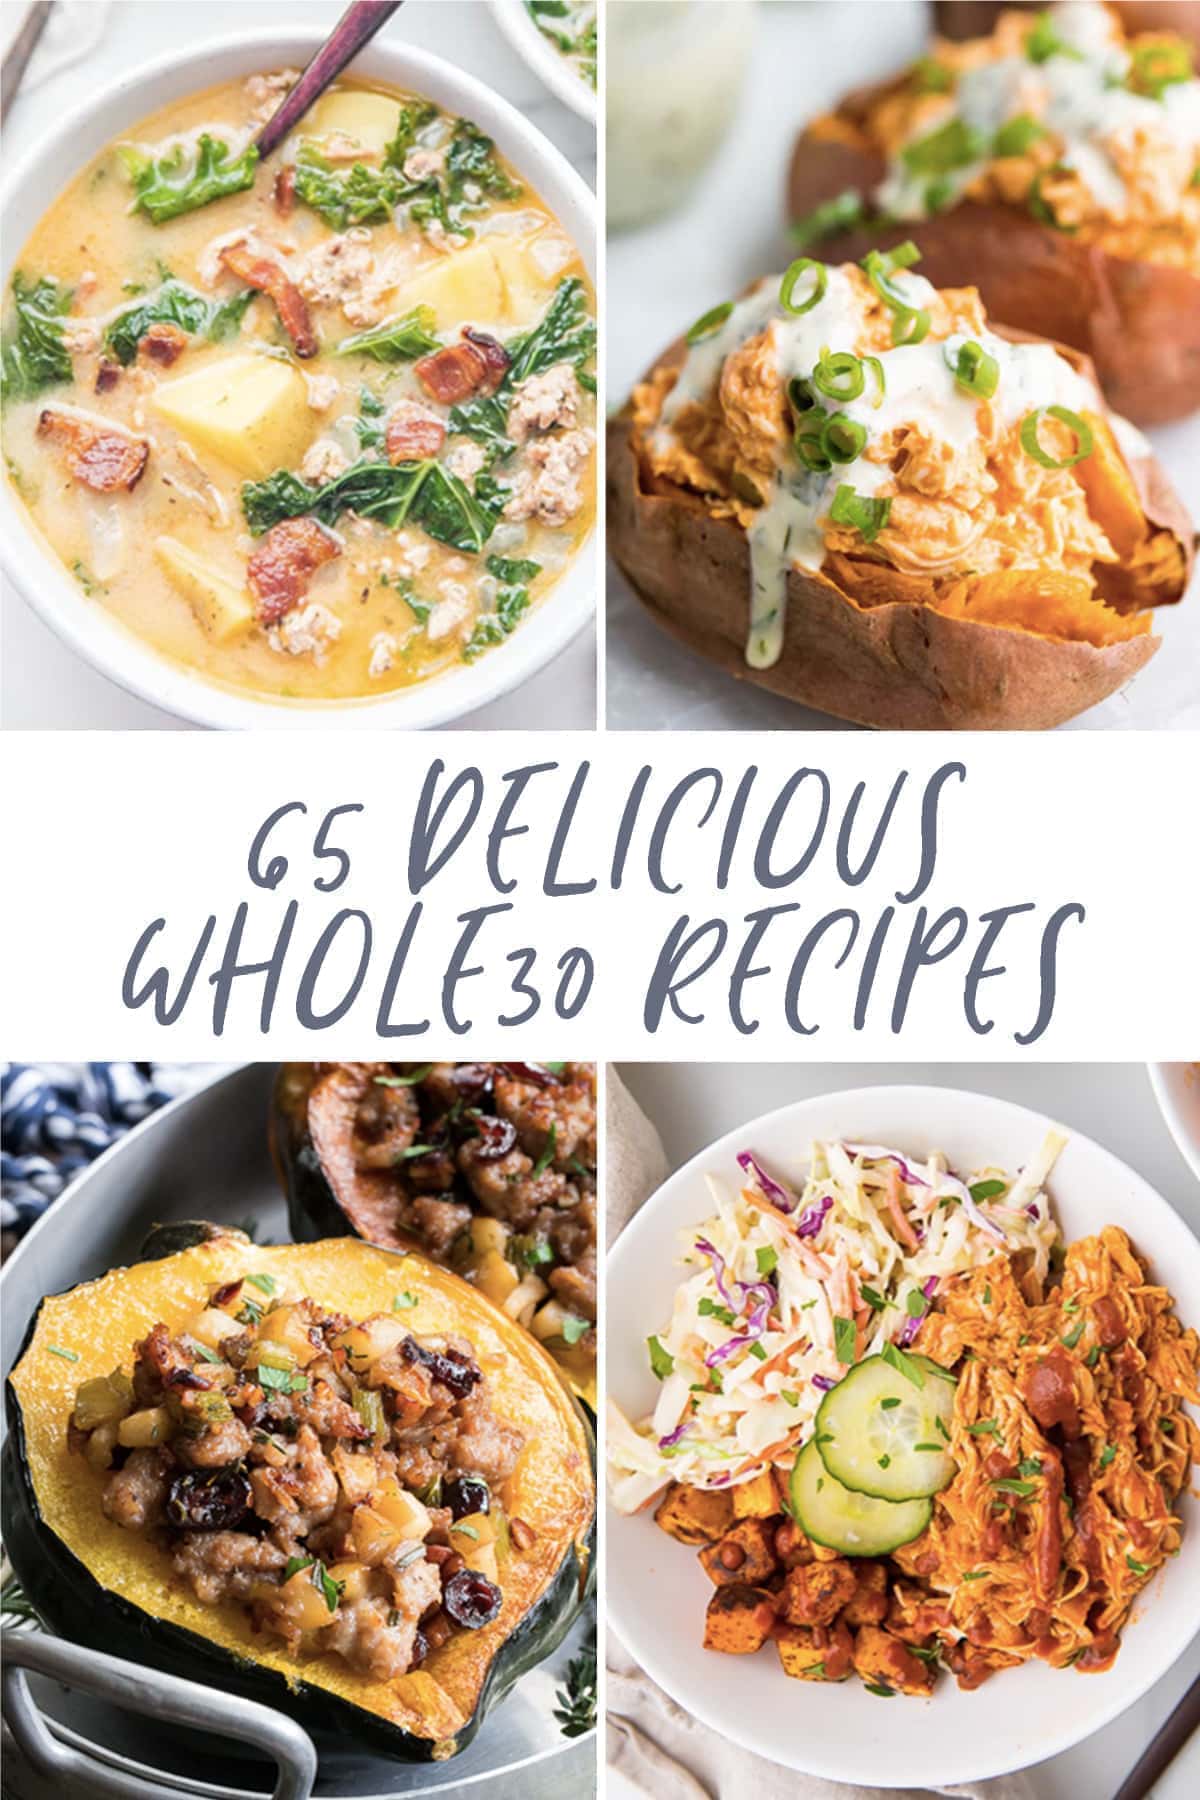 Whole30 Recipes: The Ultimate Guide to Feeding Your Family Well